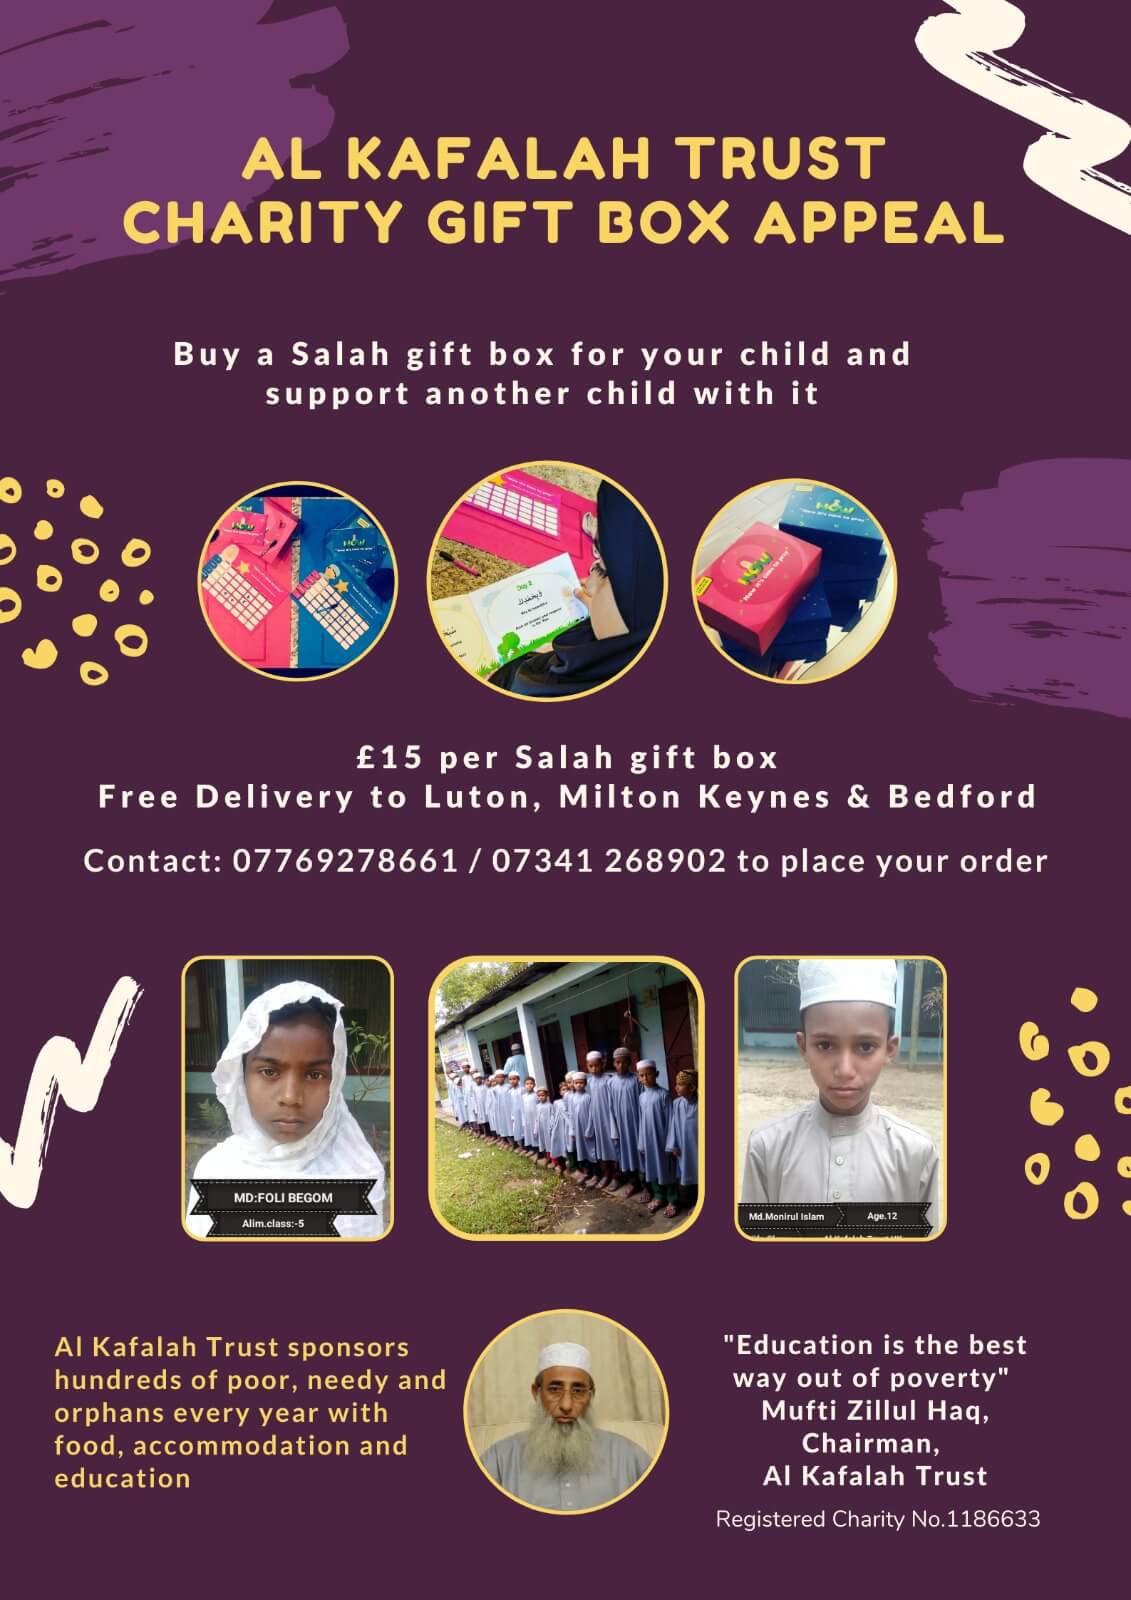 Buy a Salah gift box for your child - donate the proceeds to another poor child